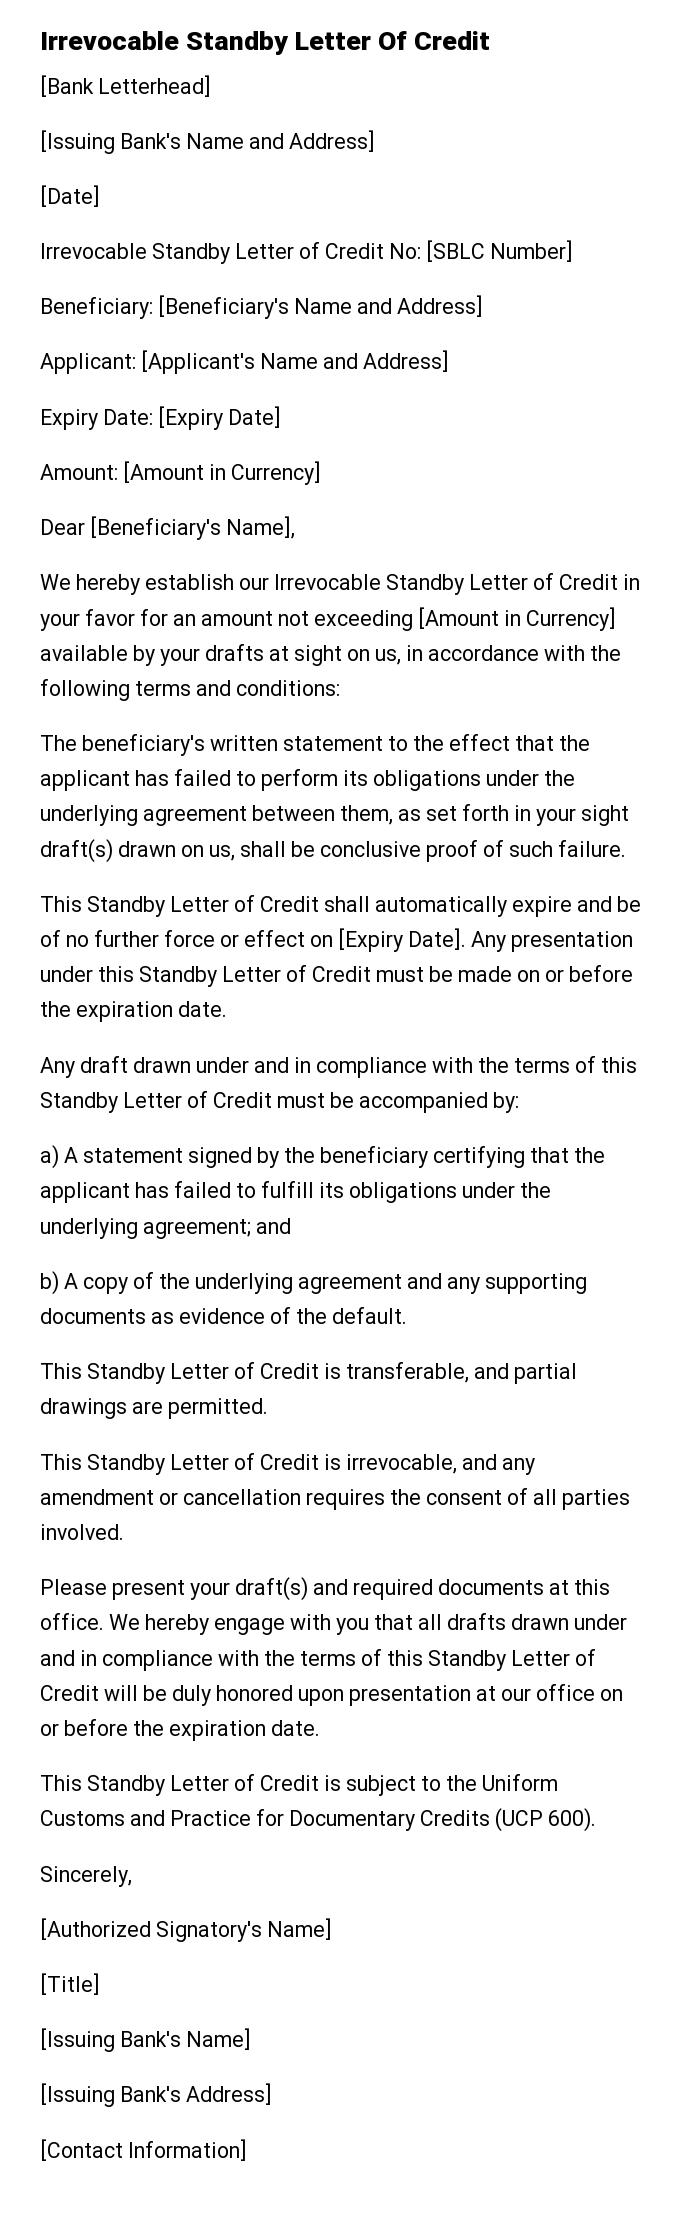 Irrevocable Standby Letter Of Credit